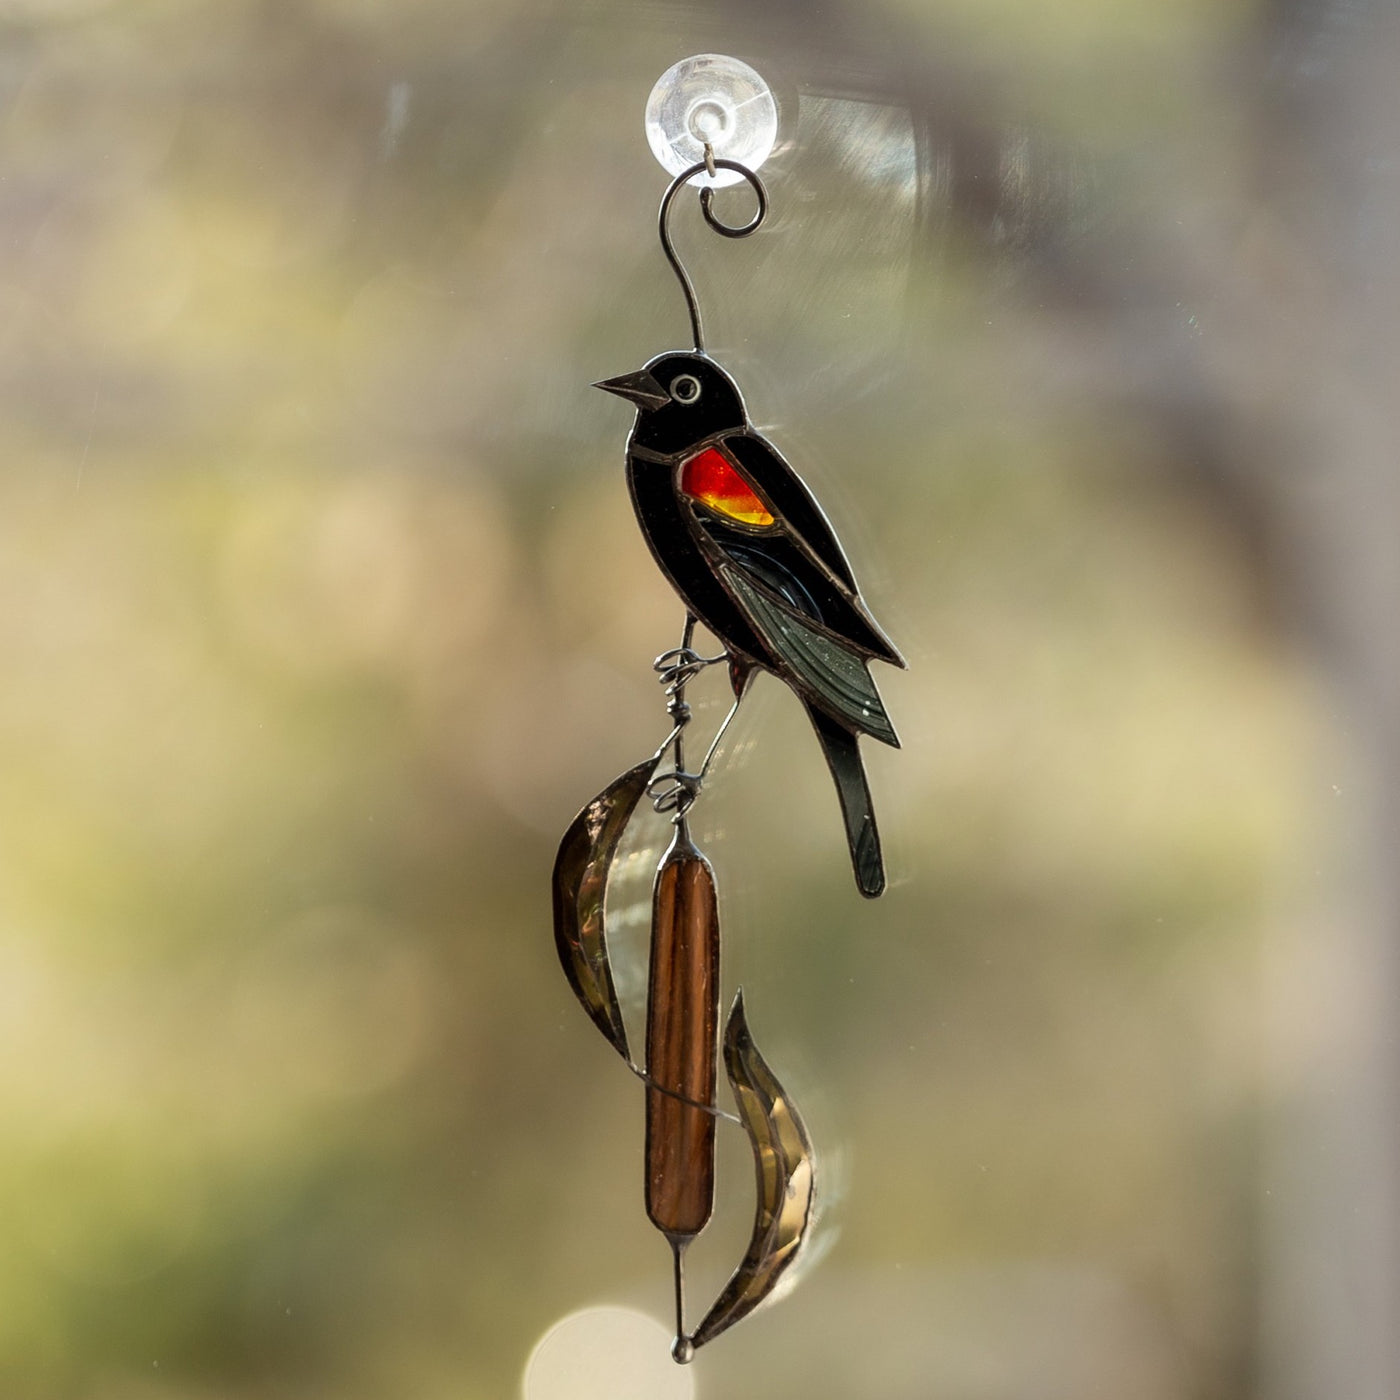 Window hanging of a stained glass red-winged blackbird on the reeds